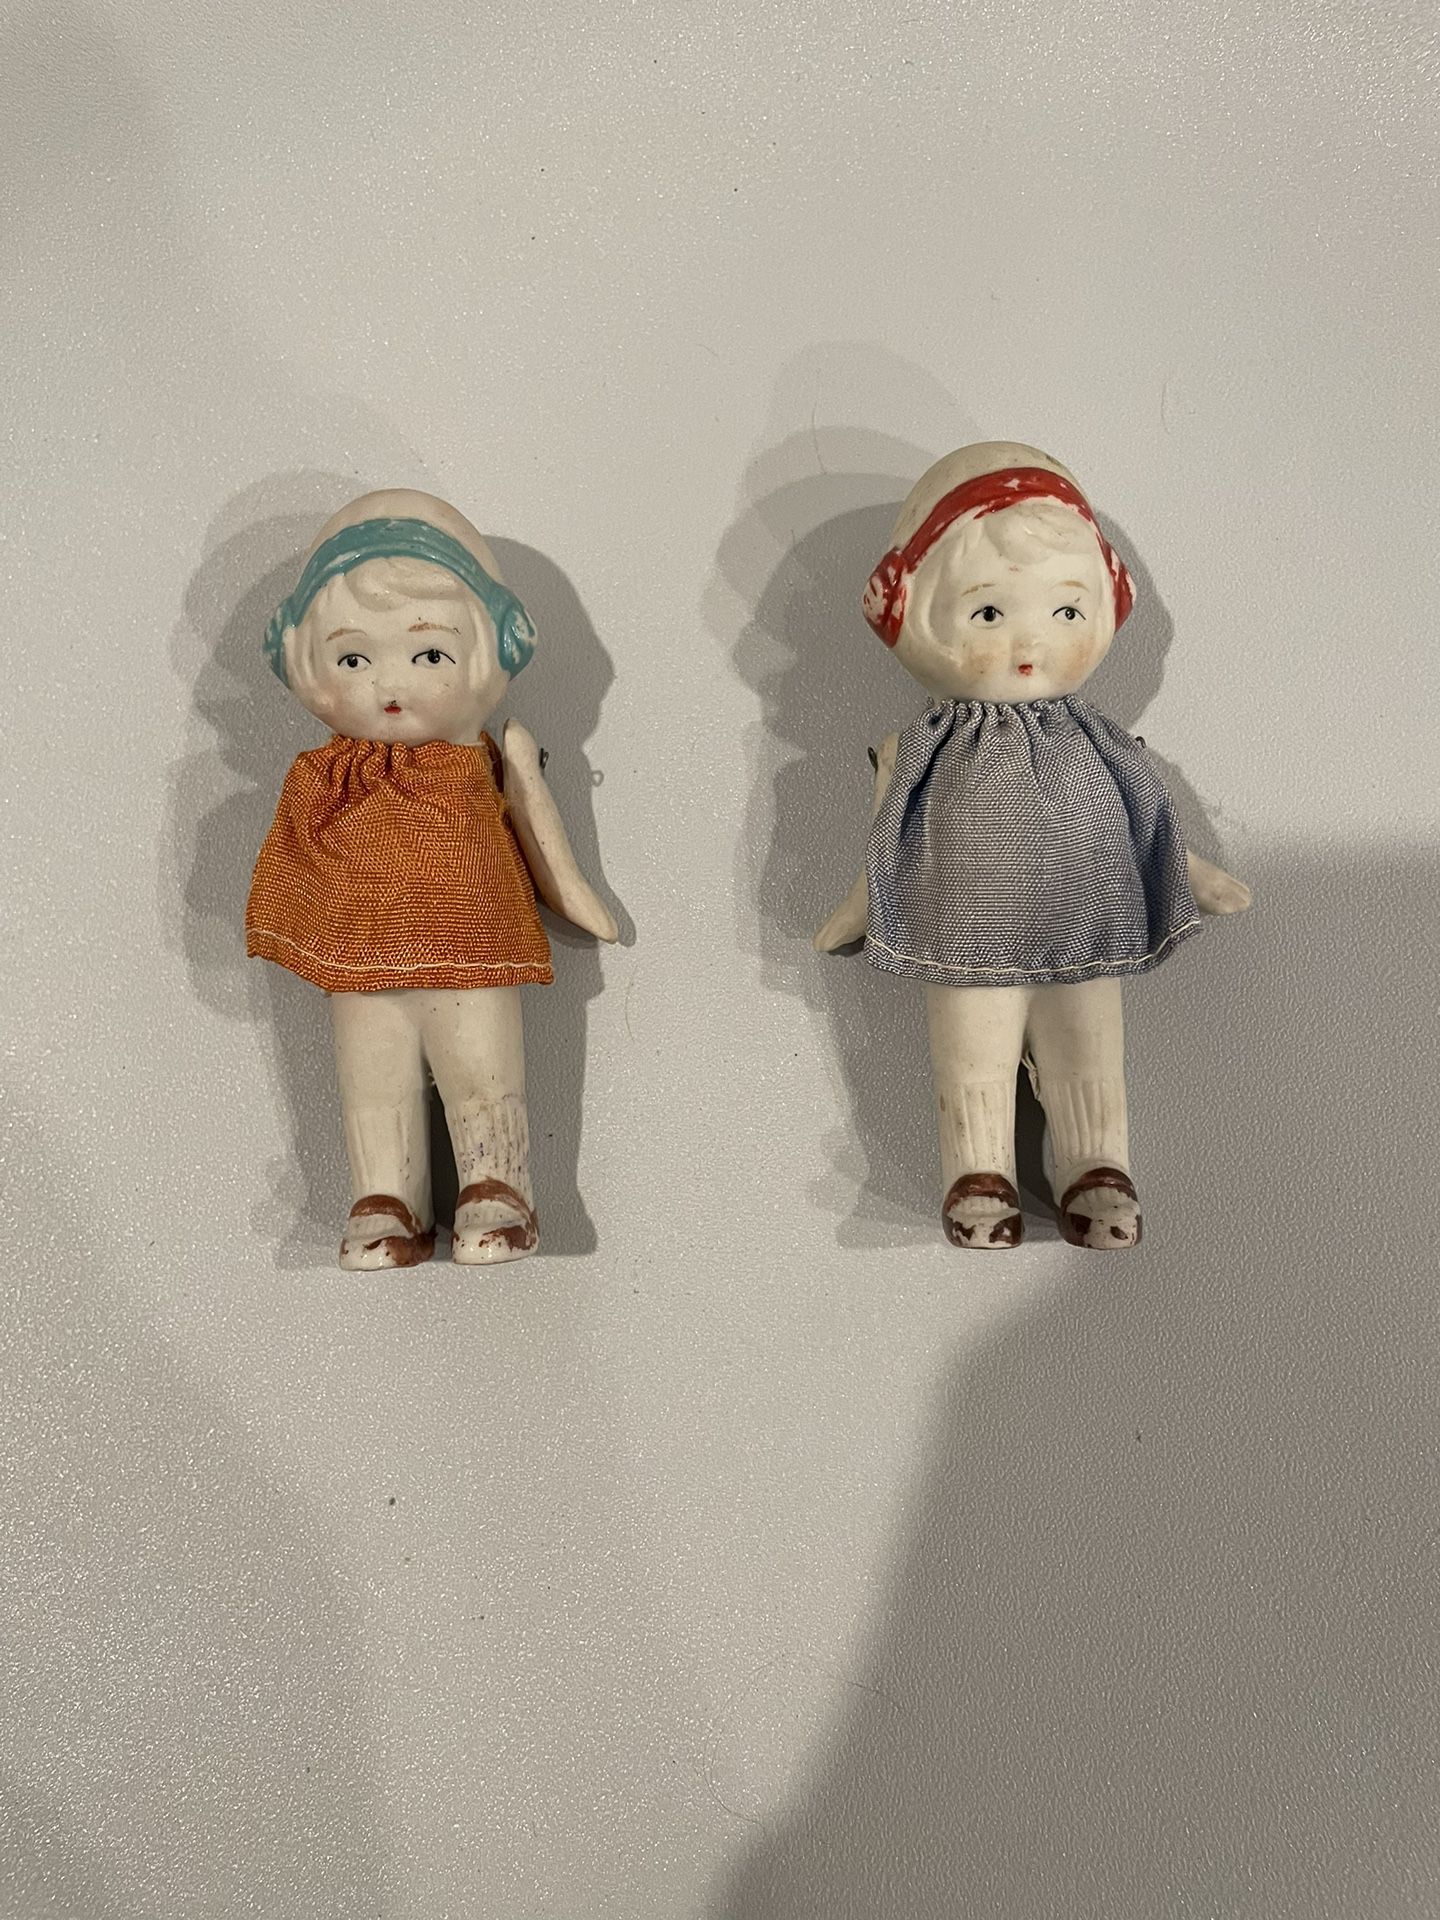 2 Vintage 1930s Japanese Jointed Bisqu dolls- Hand painted face and w/ dresses